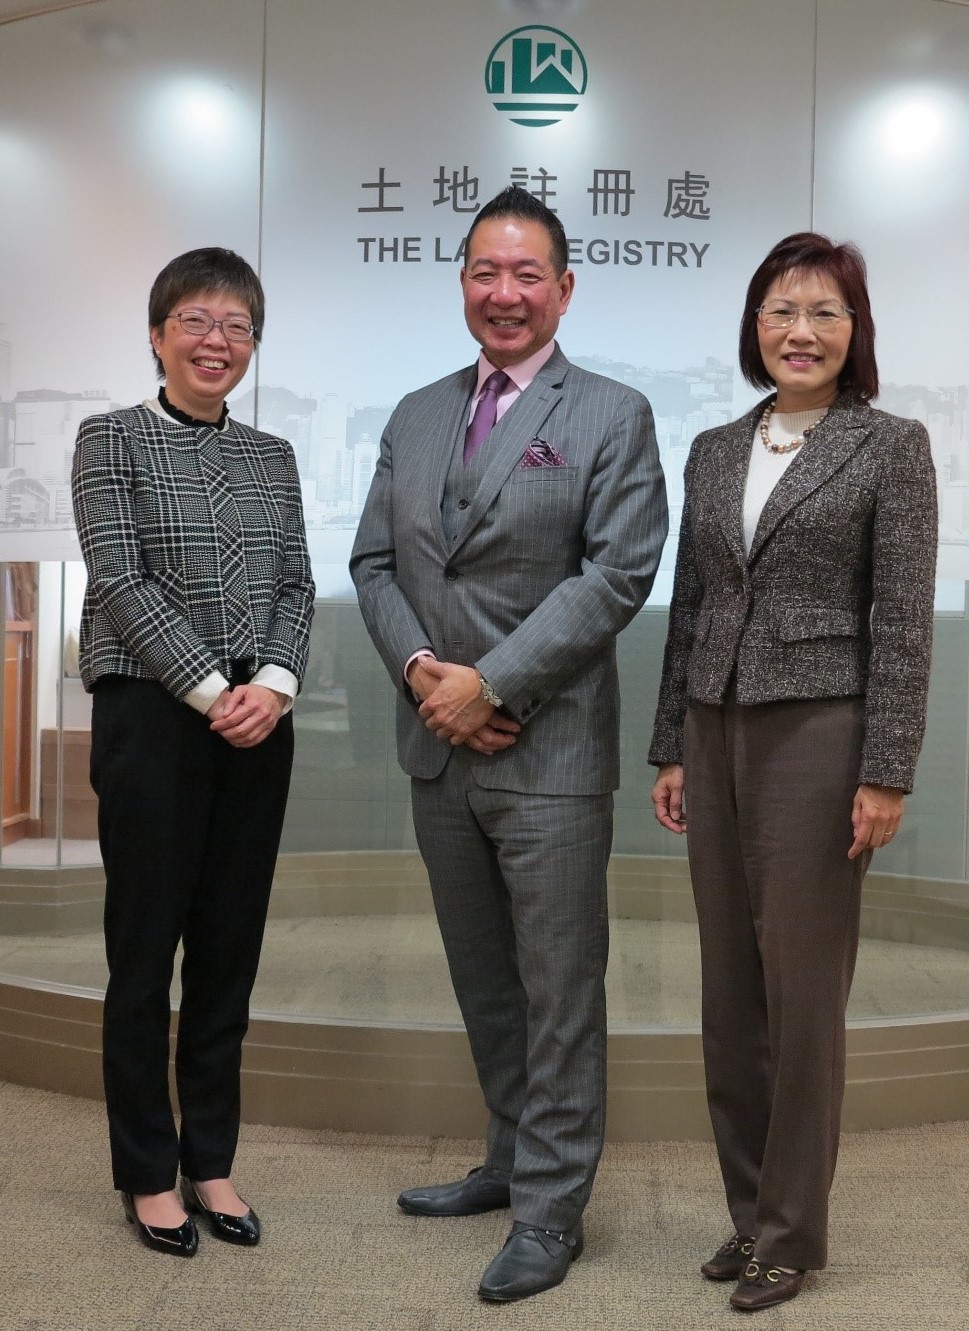 The Land Registrar, Ms. Doris CHEUNG, JP (right), Director of Titles for the Province of Ontario, Mr Jeffrey LEM (centre) and the Registry Manager, Mrs. Amy FONG, JP (left)